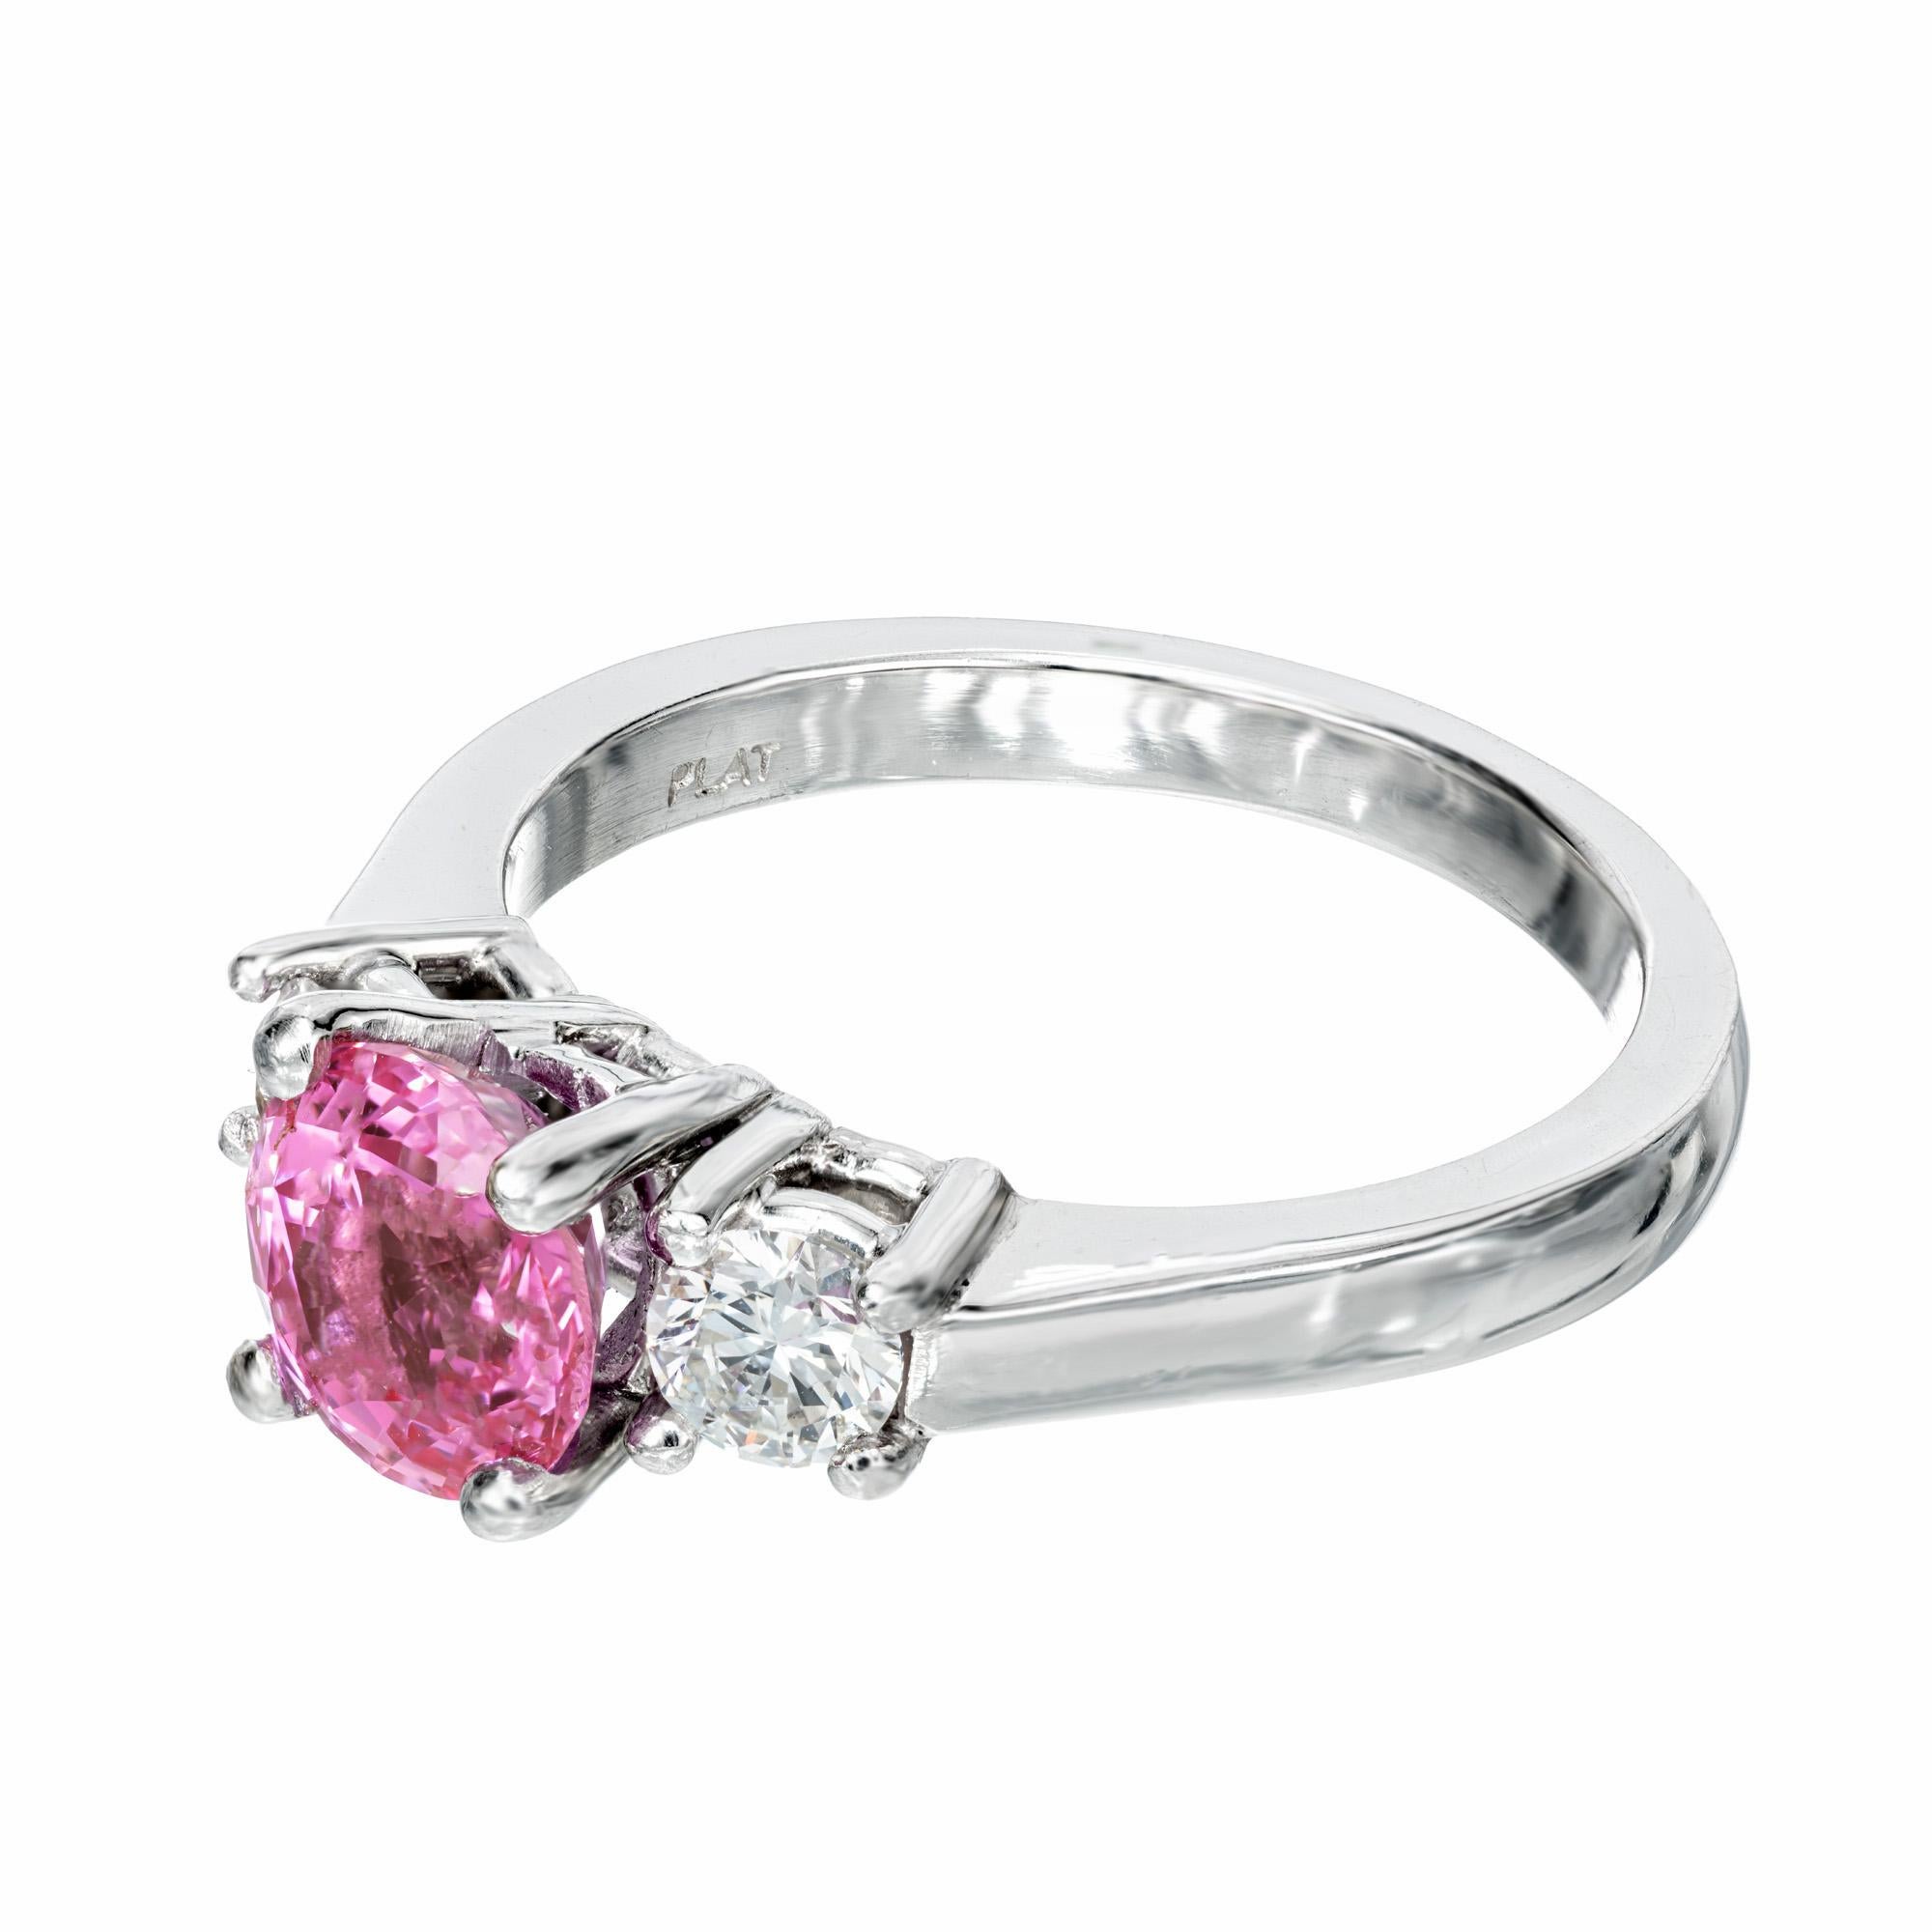 For Sale:  AGL Certified 1.79 Carat Pink Sapphire Diamond Platinum Engagement Ring 2